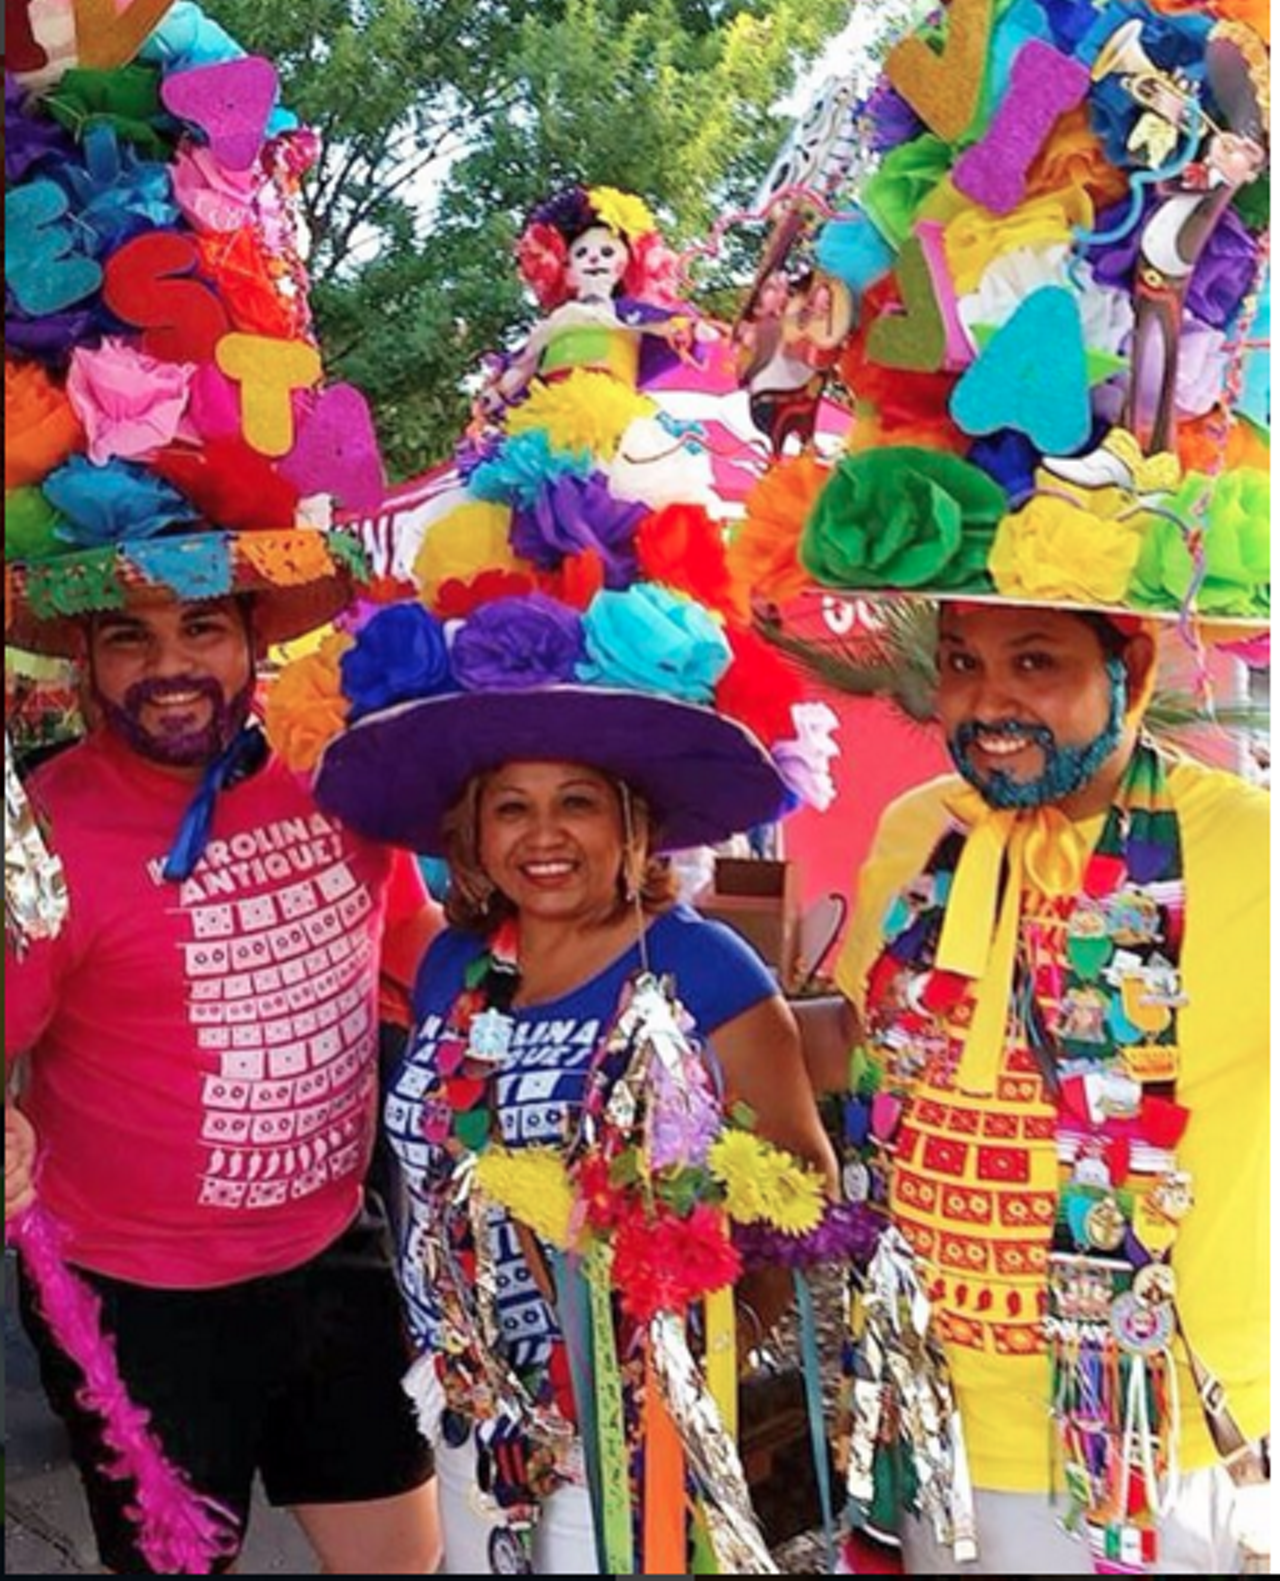 These folks are killing the medal game, the hat game, the Fiesta game. They win them all. 
Photo via Instagram/karolinasantiques